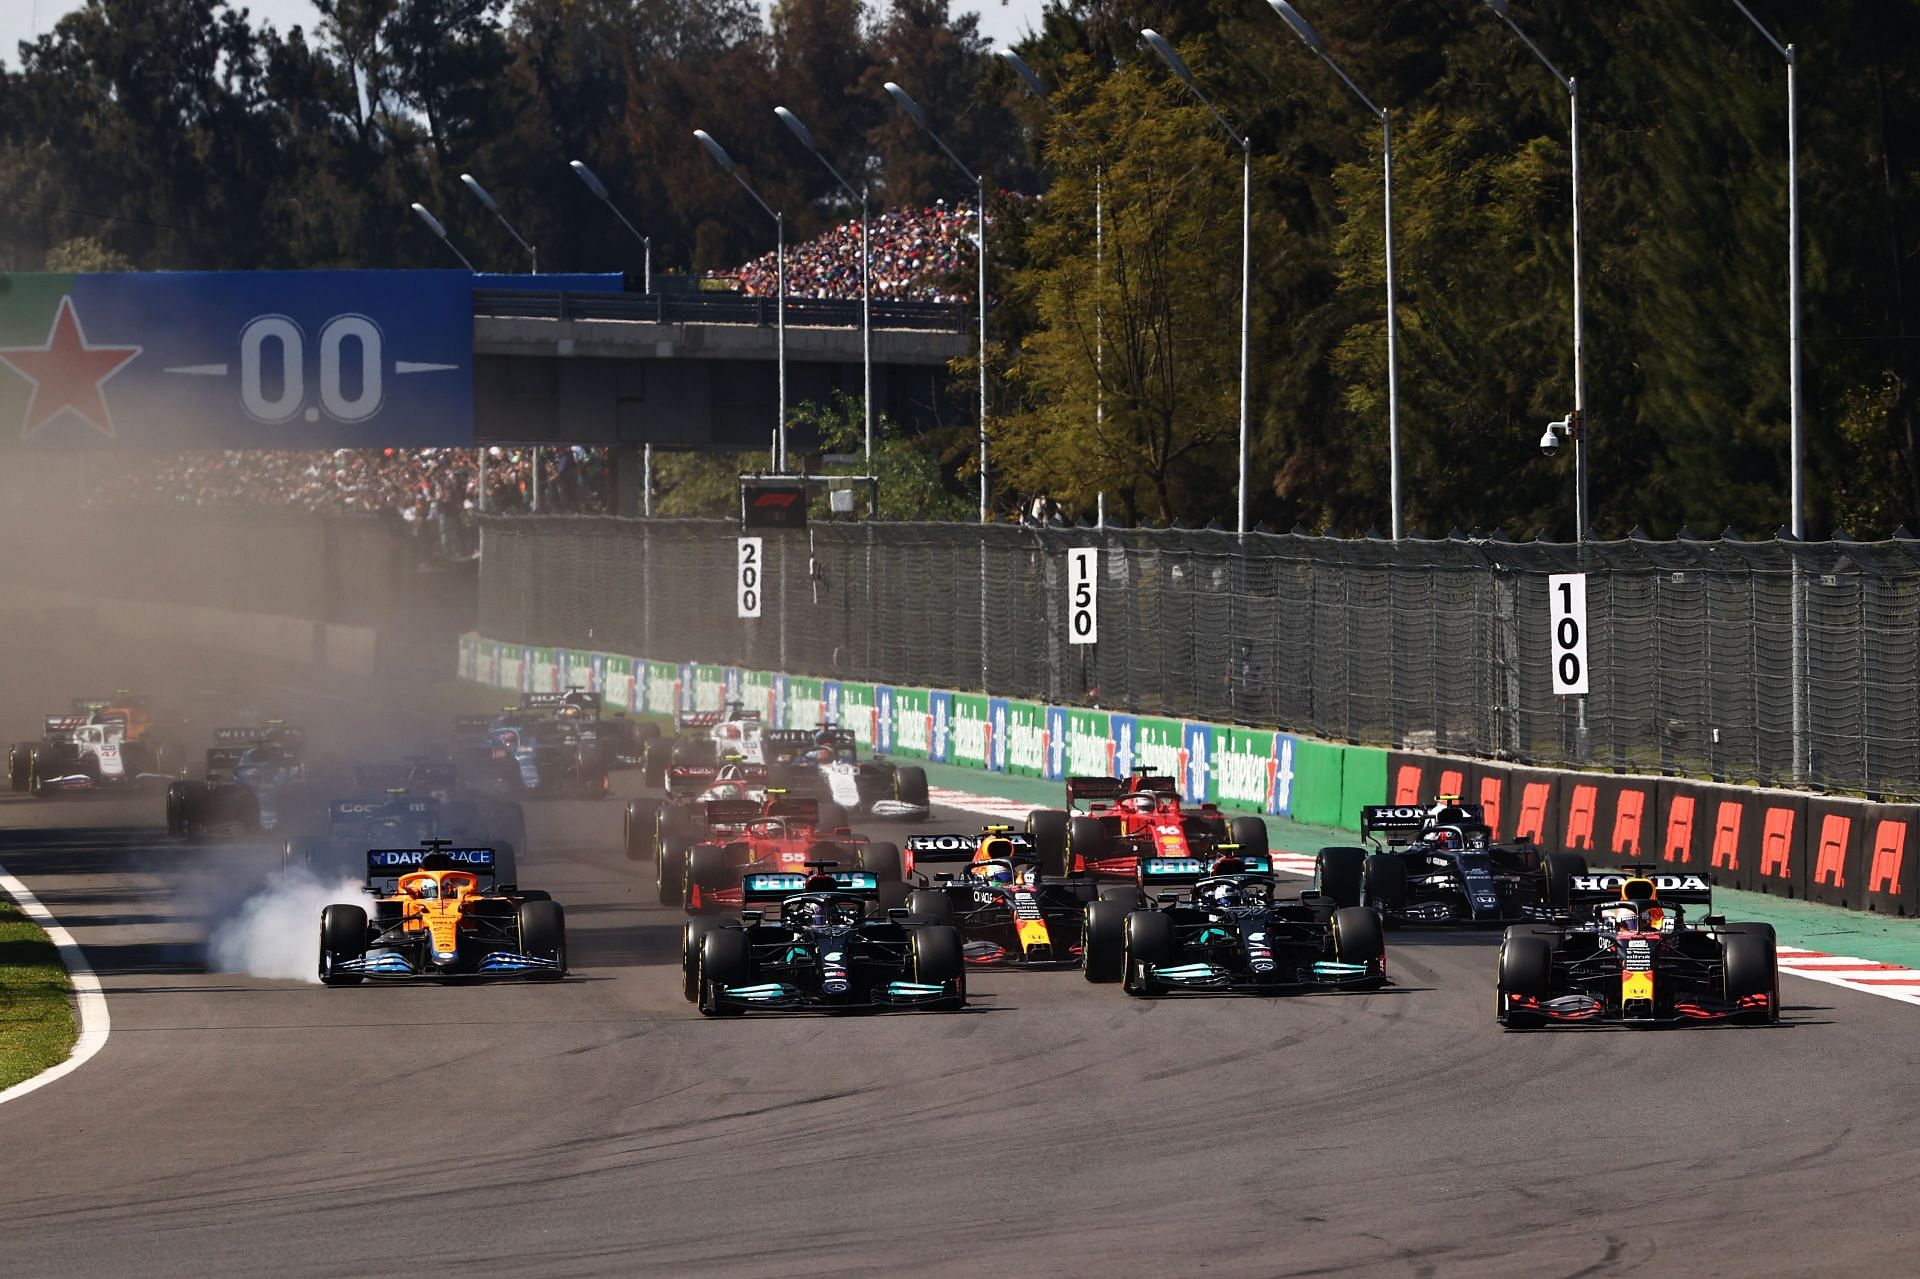 Max Verstappen leads Lewis Hamilton of Great Britain and the rest of the field at the start during the 2021 Mexican GP. (Photo by Mark Thompson/Getty Images)